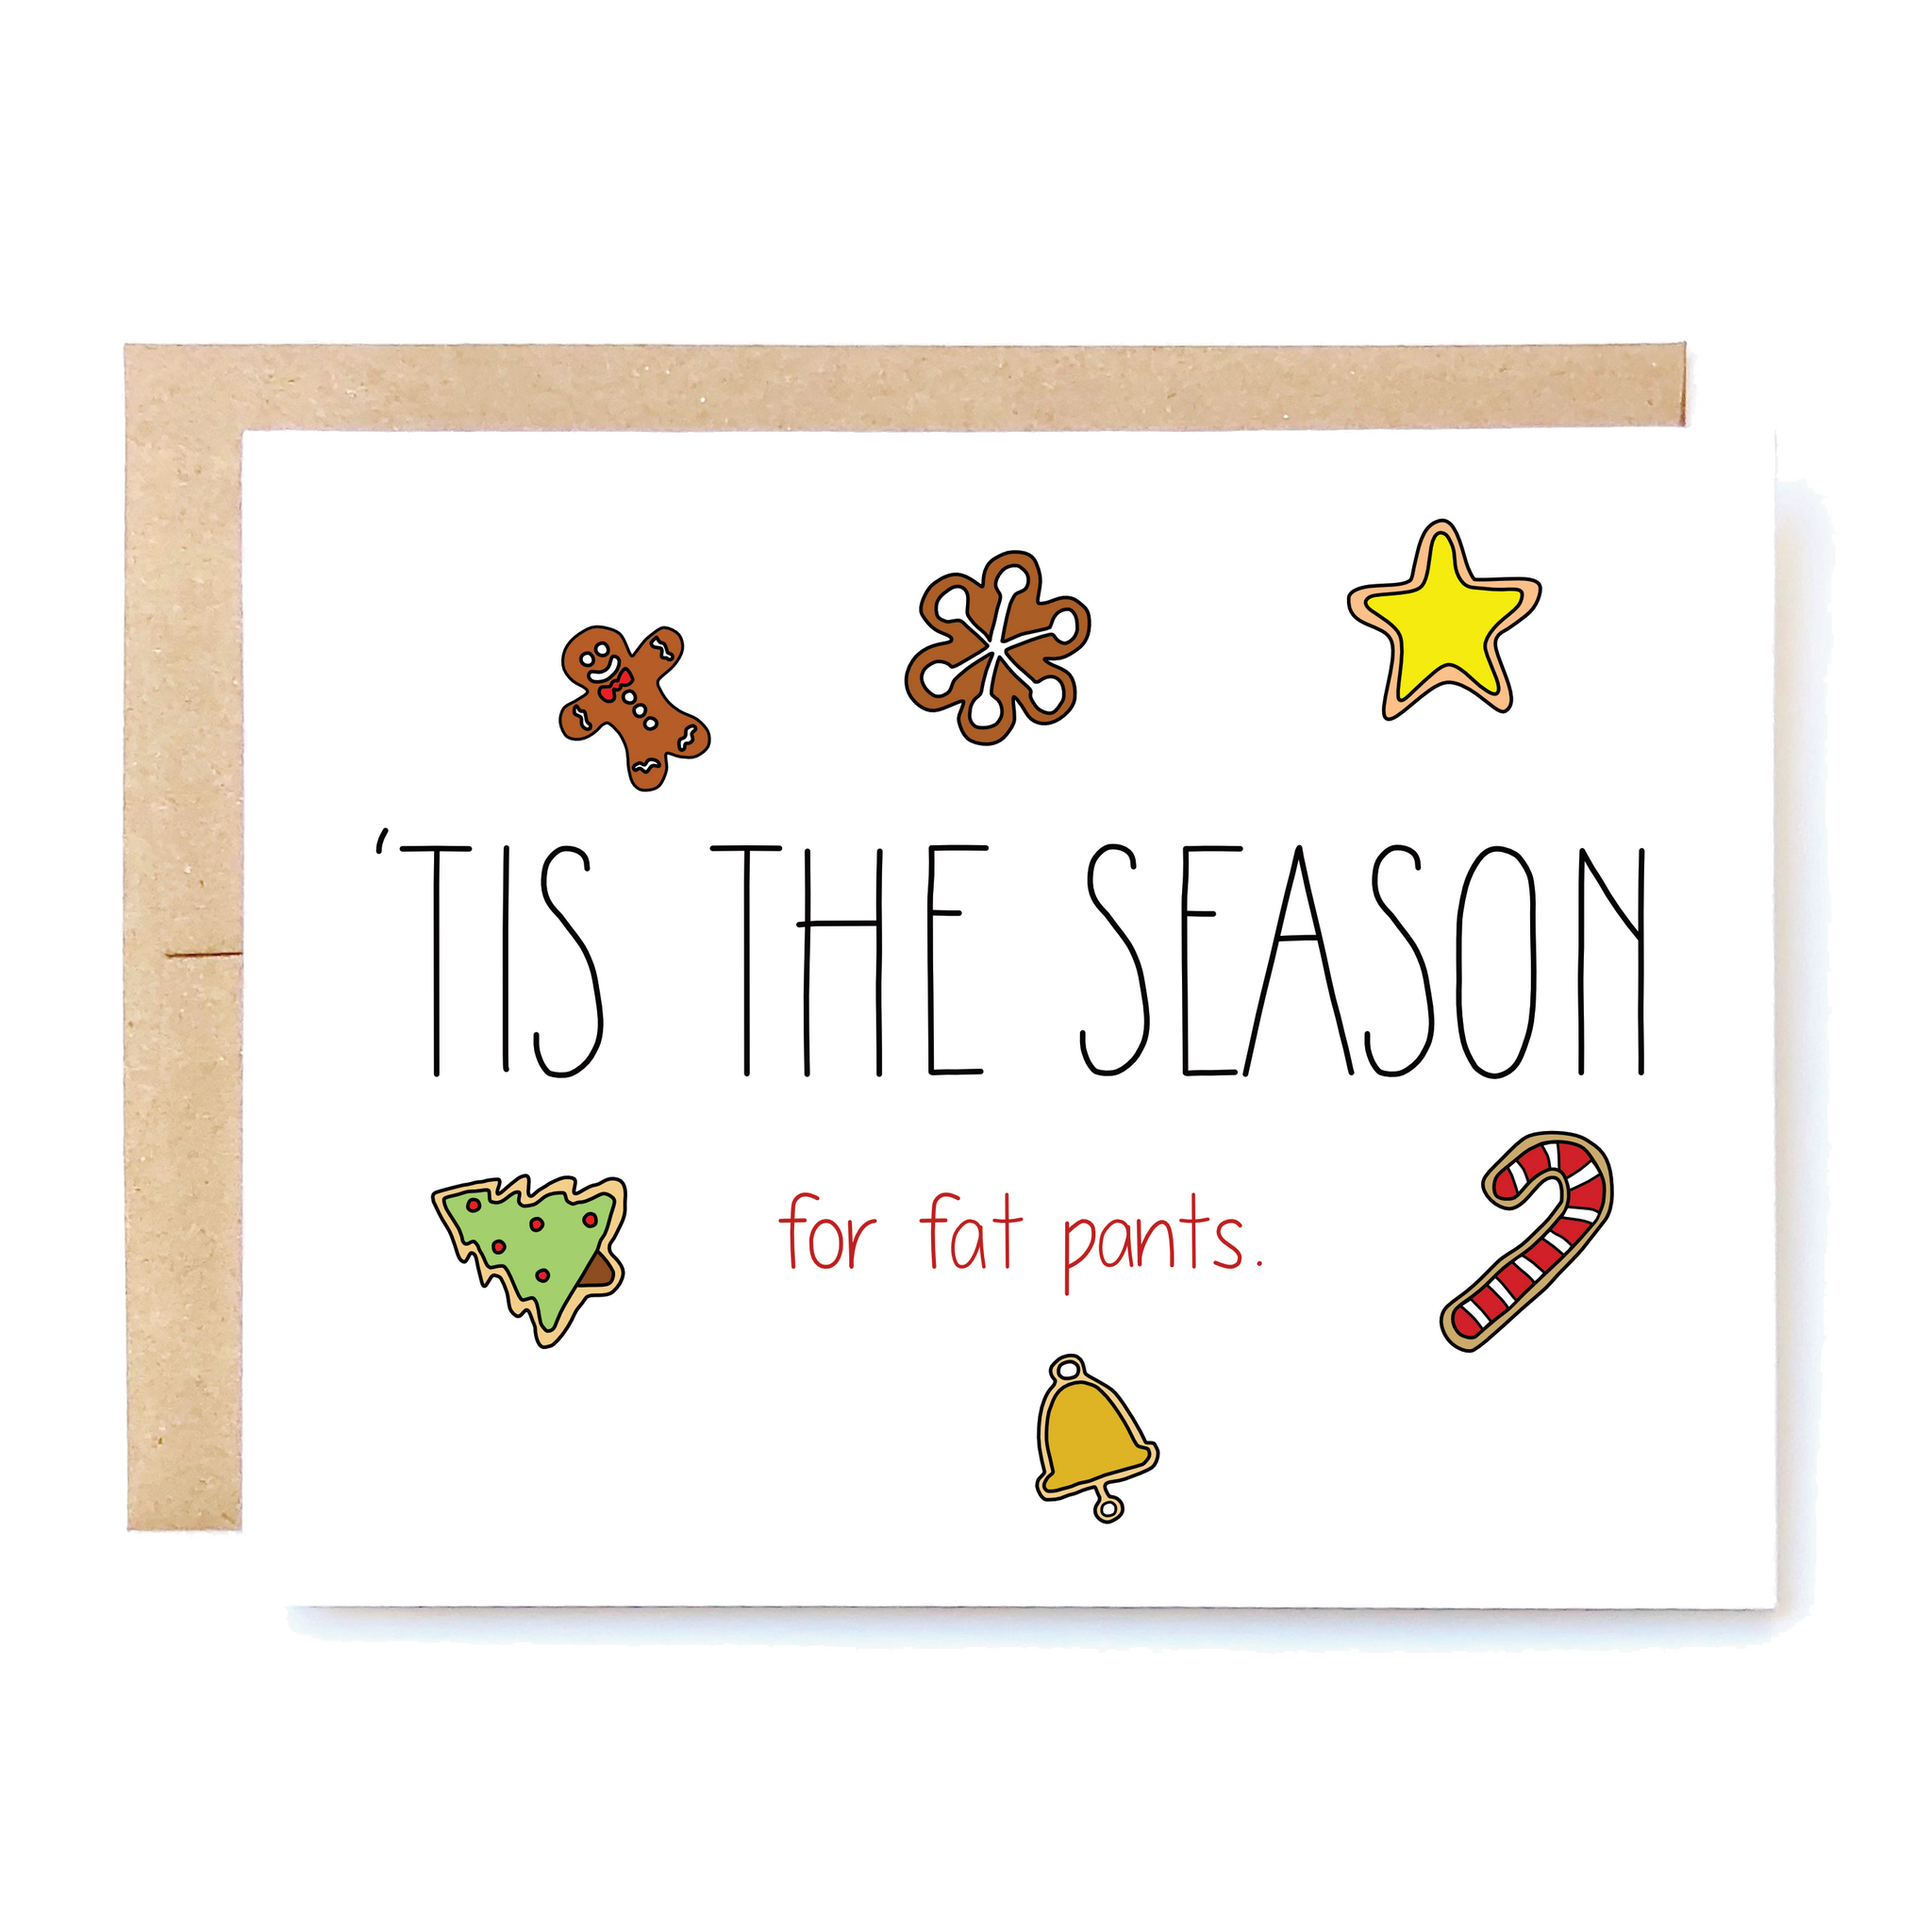 Card Front: 'Tis the season for fat pants. 